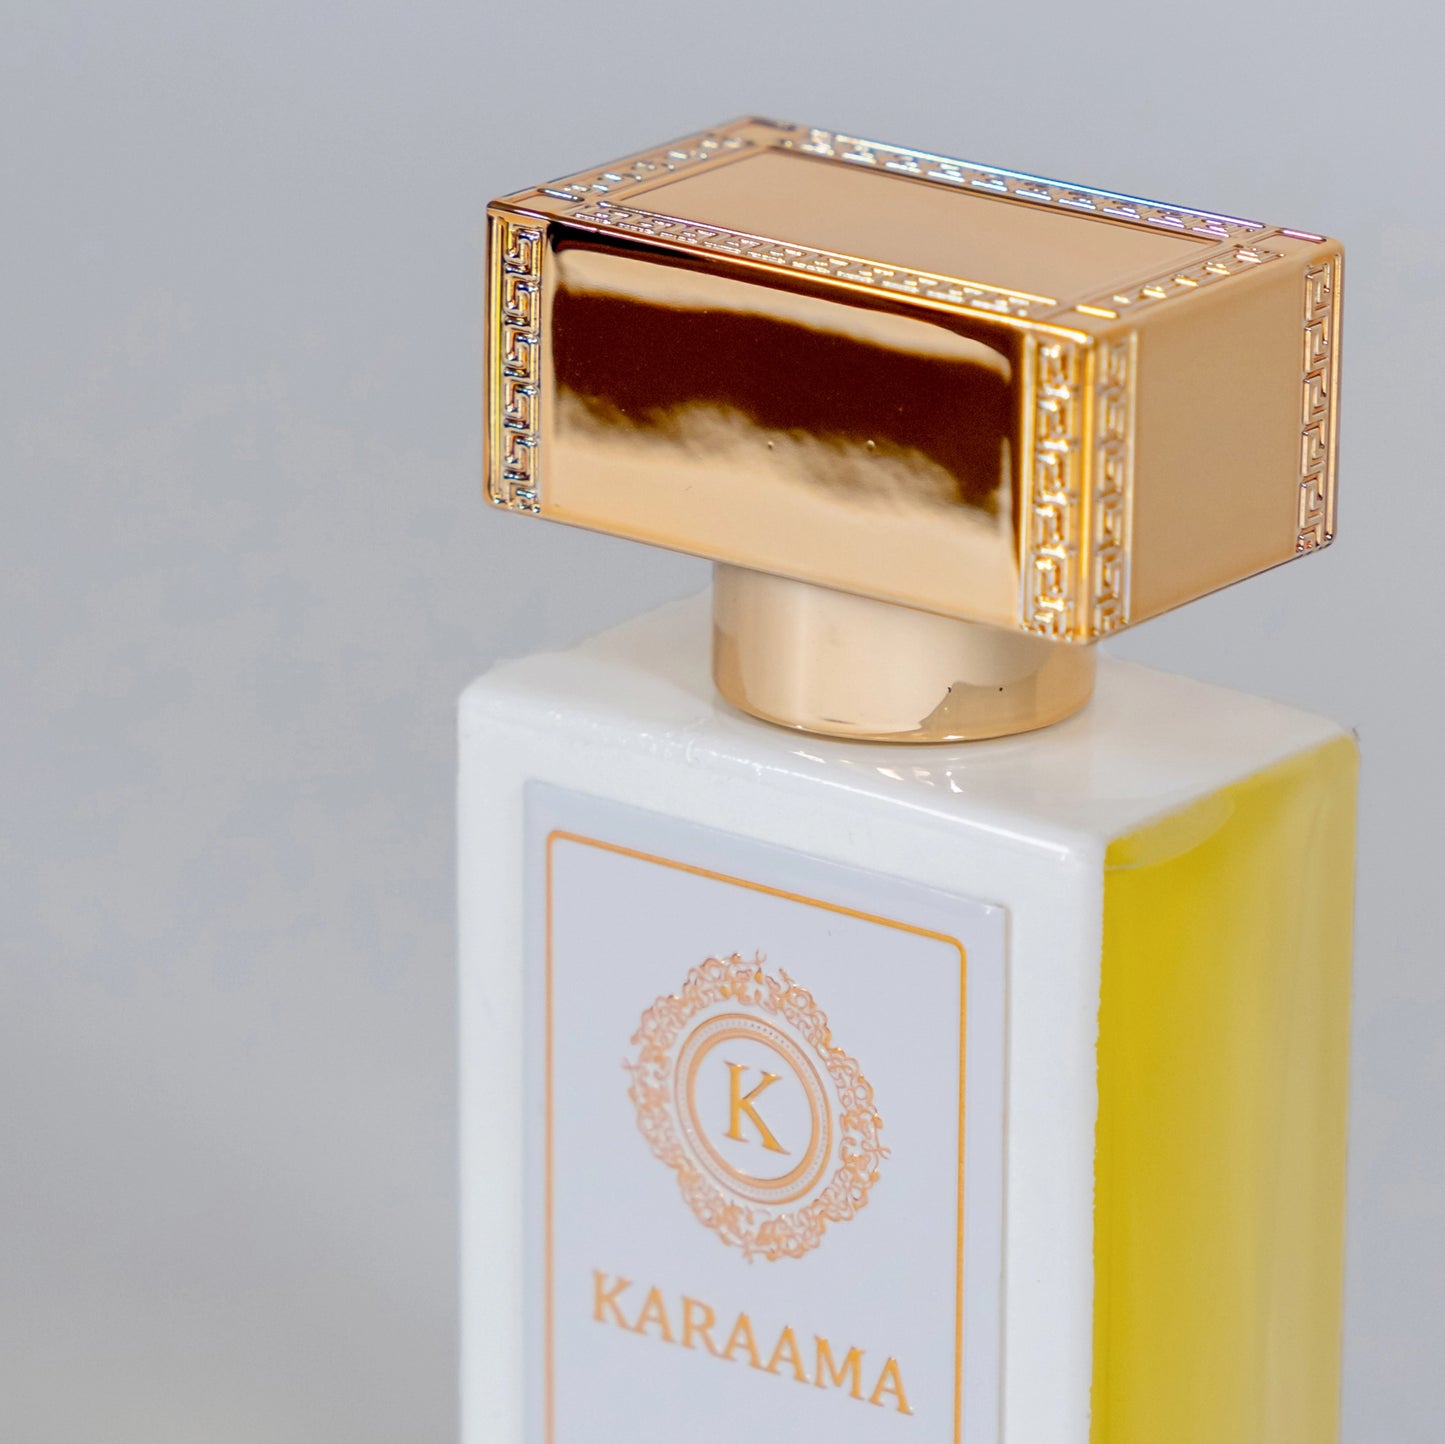 Elegant perfume bottle with golden cap and crystal details, showcasing the luxurious KARAAMA label, set against a soft, neutral background. Perfect for both personal indulgence and a sophisticated gift. #LuxuryPerfume #EleganceInABottle #FragranceTrend #DesignerScents #GiftIdeas